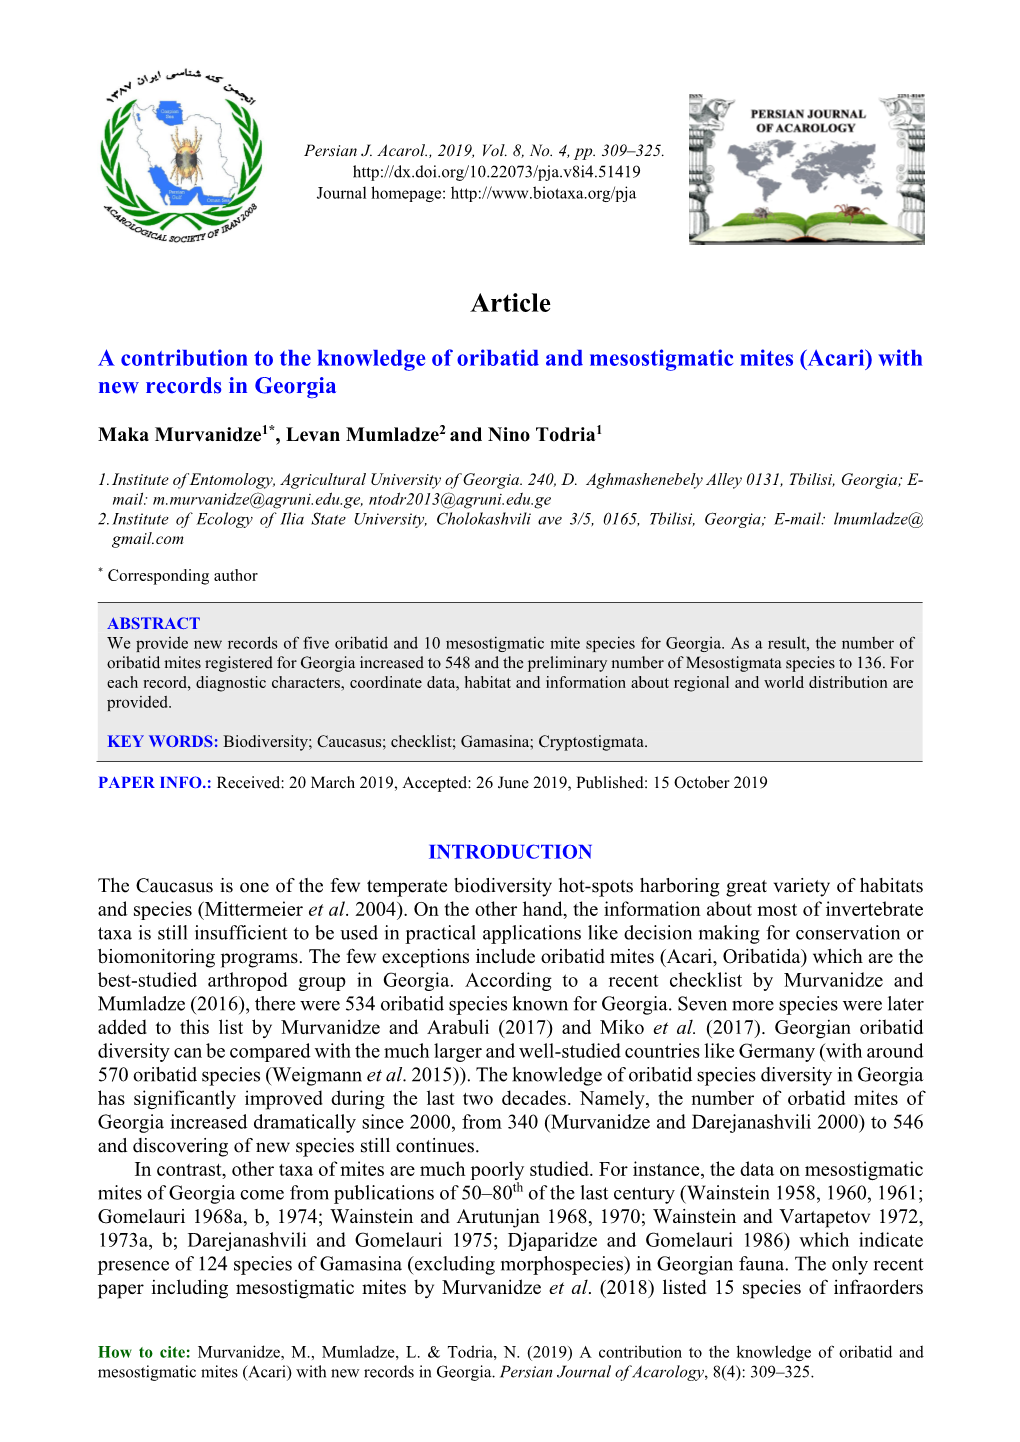 A Contribution to the Knowledge of Oribatid and Mesostigmatic Mites (Acari) with New Records in Georgia